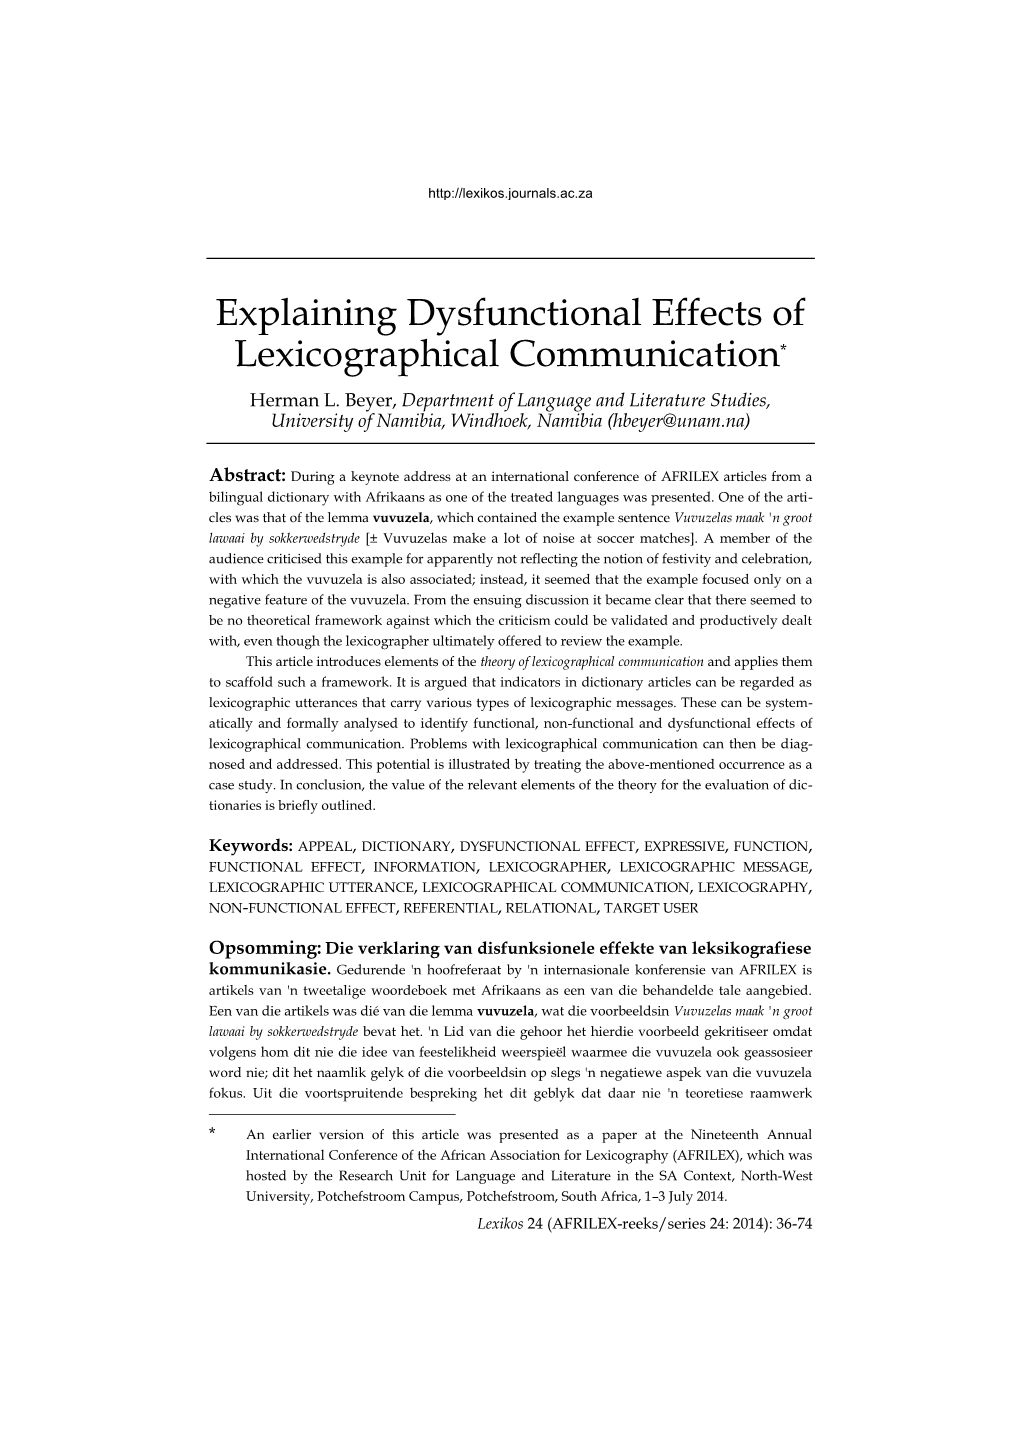 Explaining Dysfunctional Effects of Lexicographical Communication* Herman L